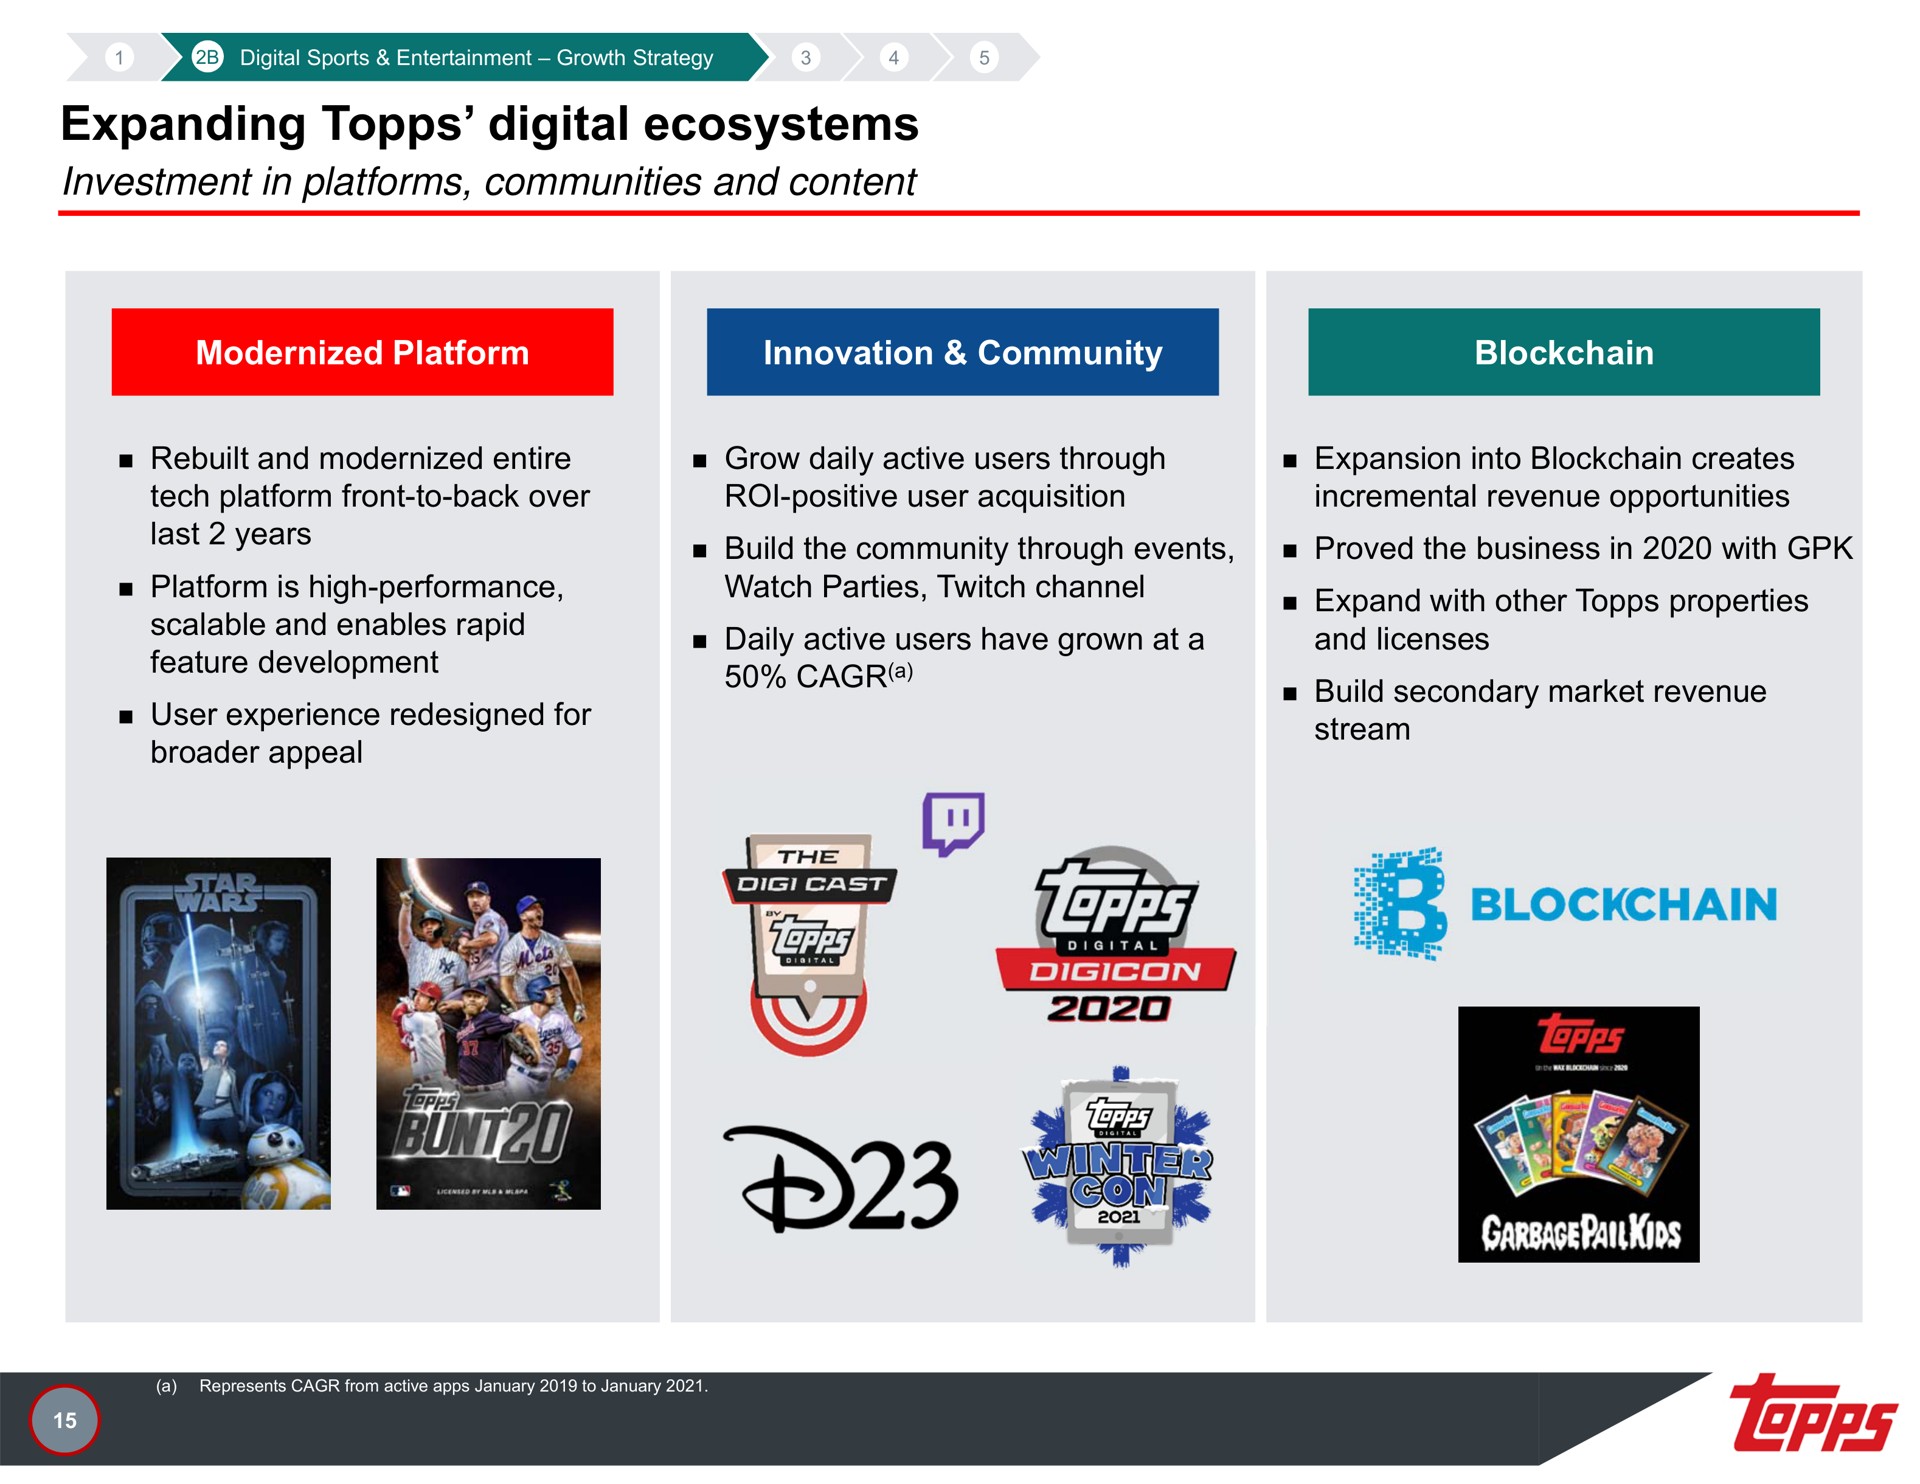 expanding digital ecosystems investment in platforms communities and content last years scalable enables rapid build the community through events daily active users have grown at a proved the business with licenses care a | Topps